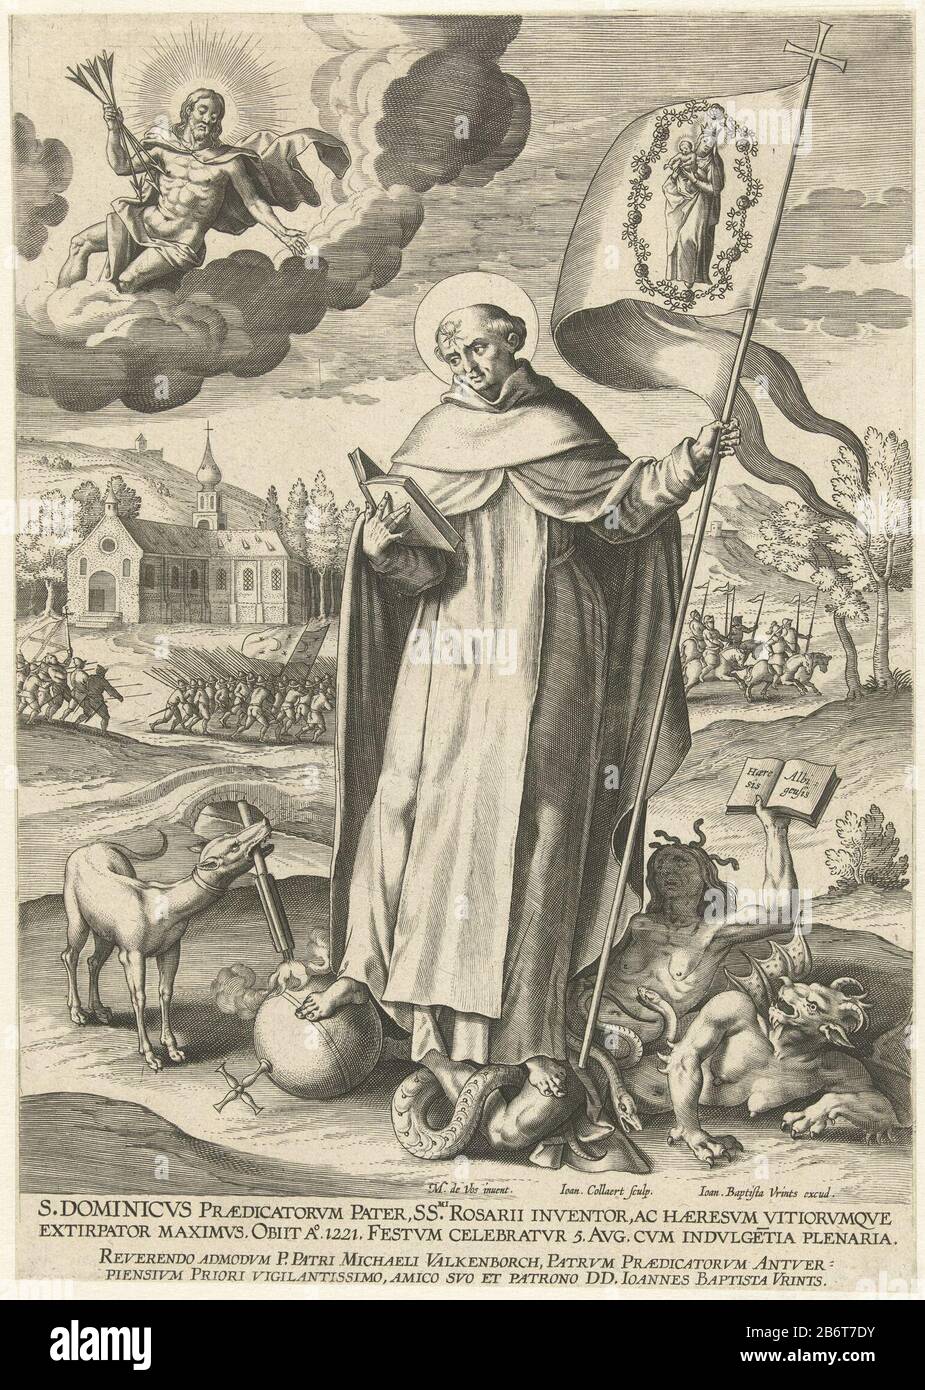 Heilige Dominicus The Saint Dominic bears habit of his order. In his hand a book and a flag Where: Maria on a rosary. On his forehead a star. Dominic trampled the heresies of the Albigenses. Beside him his attribute: a dog with a burning torch in his mouth (Domini canis). In the upper left corner the vision of Christ with three arrows, the virtues of the Dominican order: obedience, poverty and chastity. In the background a passing army. The print has a Latin onderschrift. Manufacturer : printmaker Jan Collaert (II) (listed building), designed by: Marten de Vos (listed building) Editor: Johanne Stock Photo